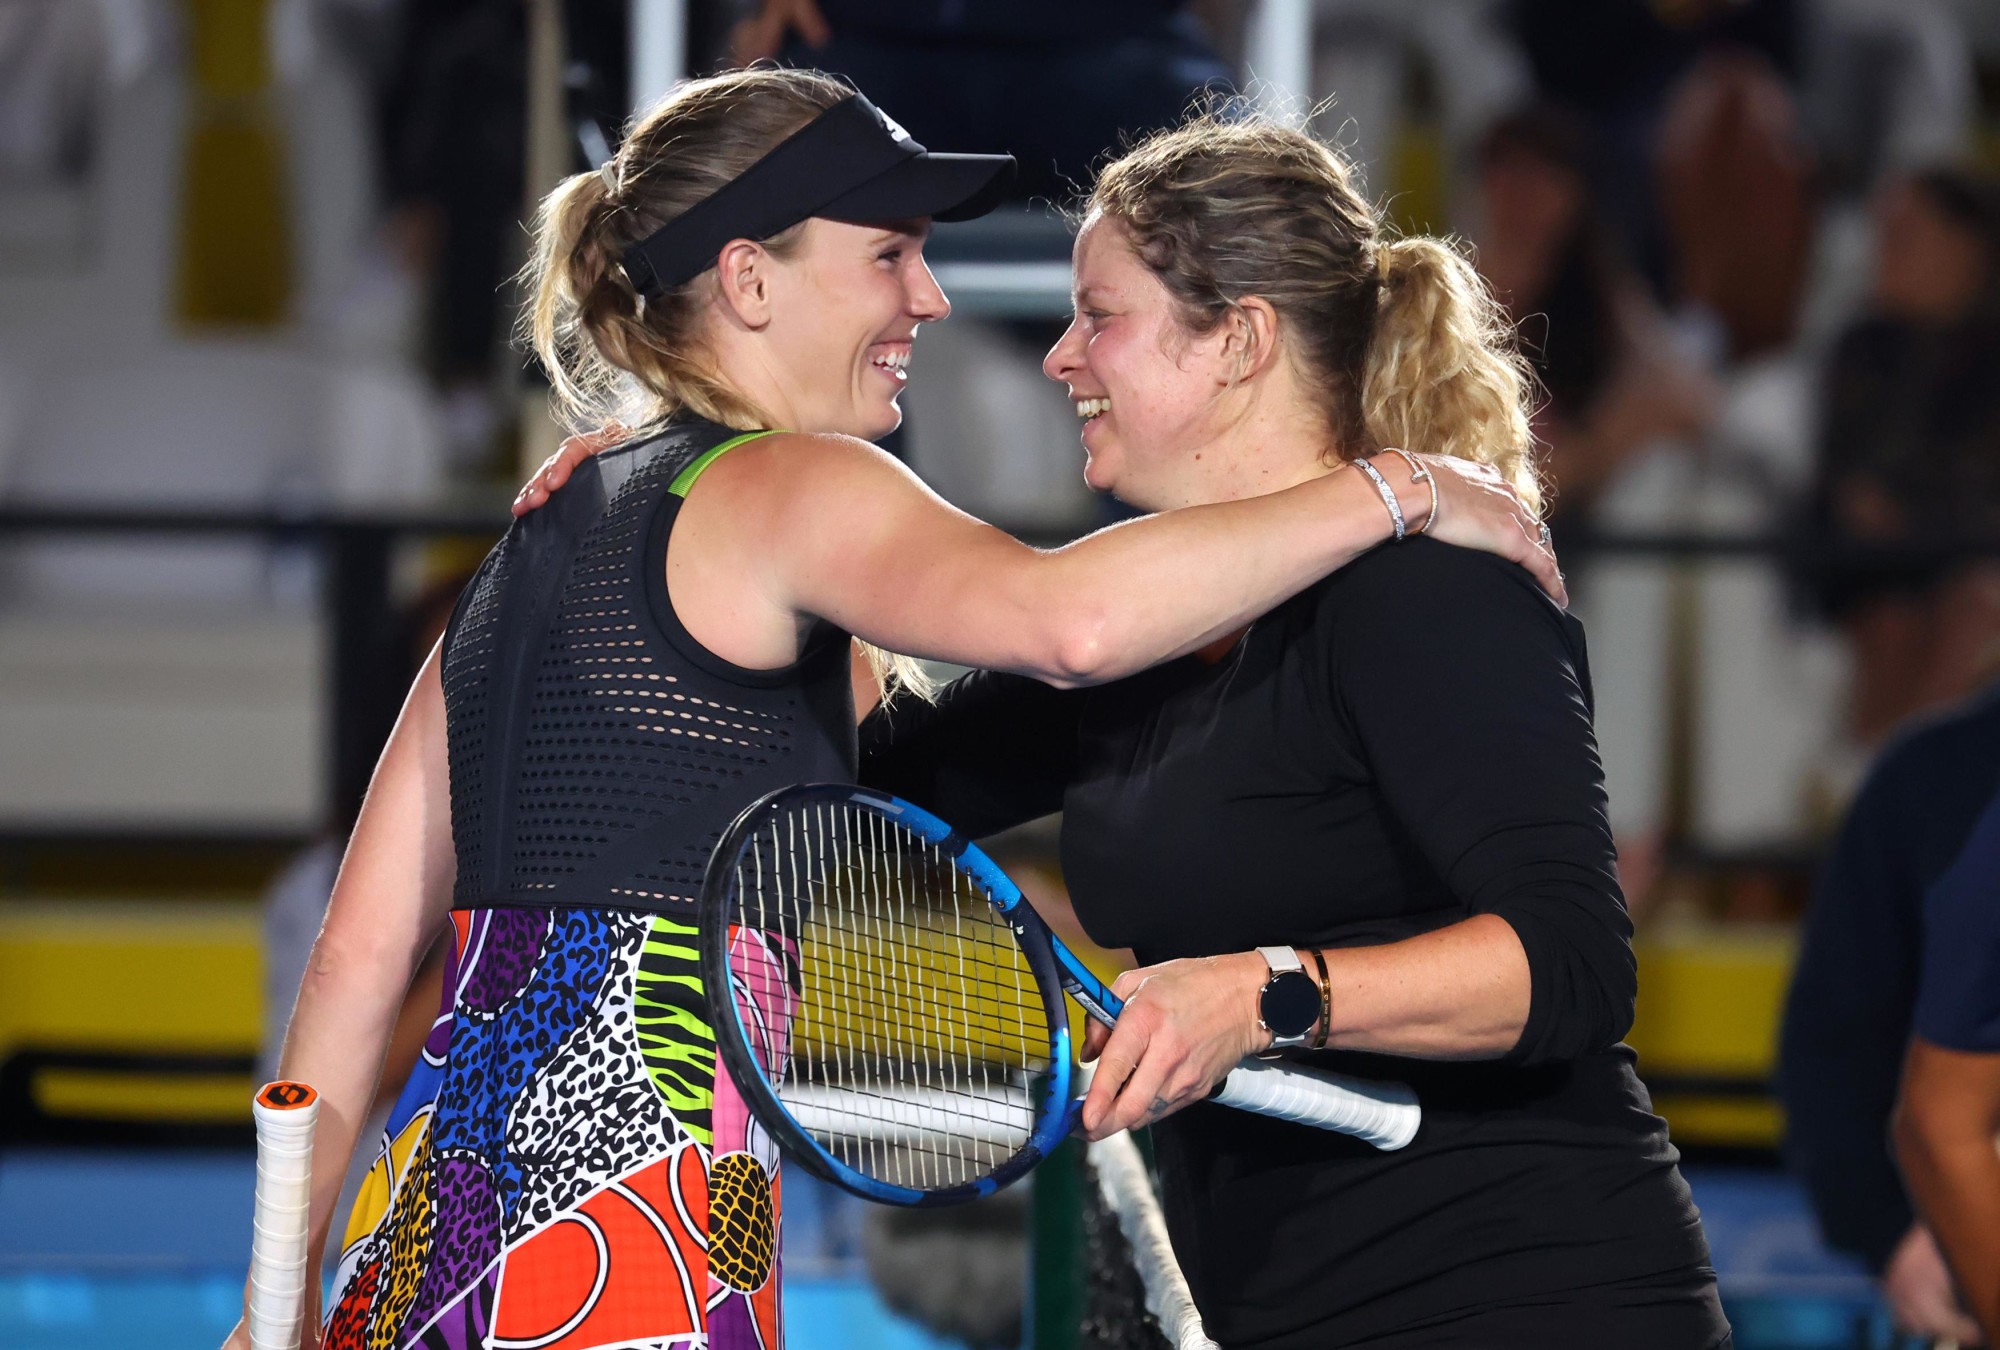 Tennis legends Caroline Wozniacki (L) and Kim Clijsters embrace during the Women’s Singles Exhibition Game for Expo 2020 Dubai Tennis Week at the Expo Sports Aren m52489